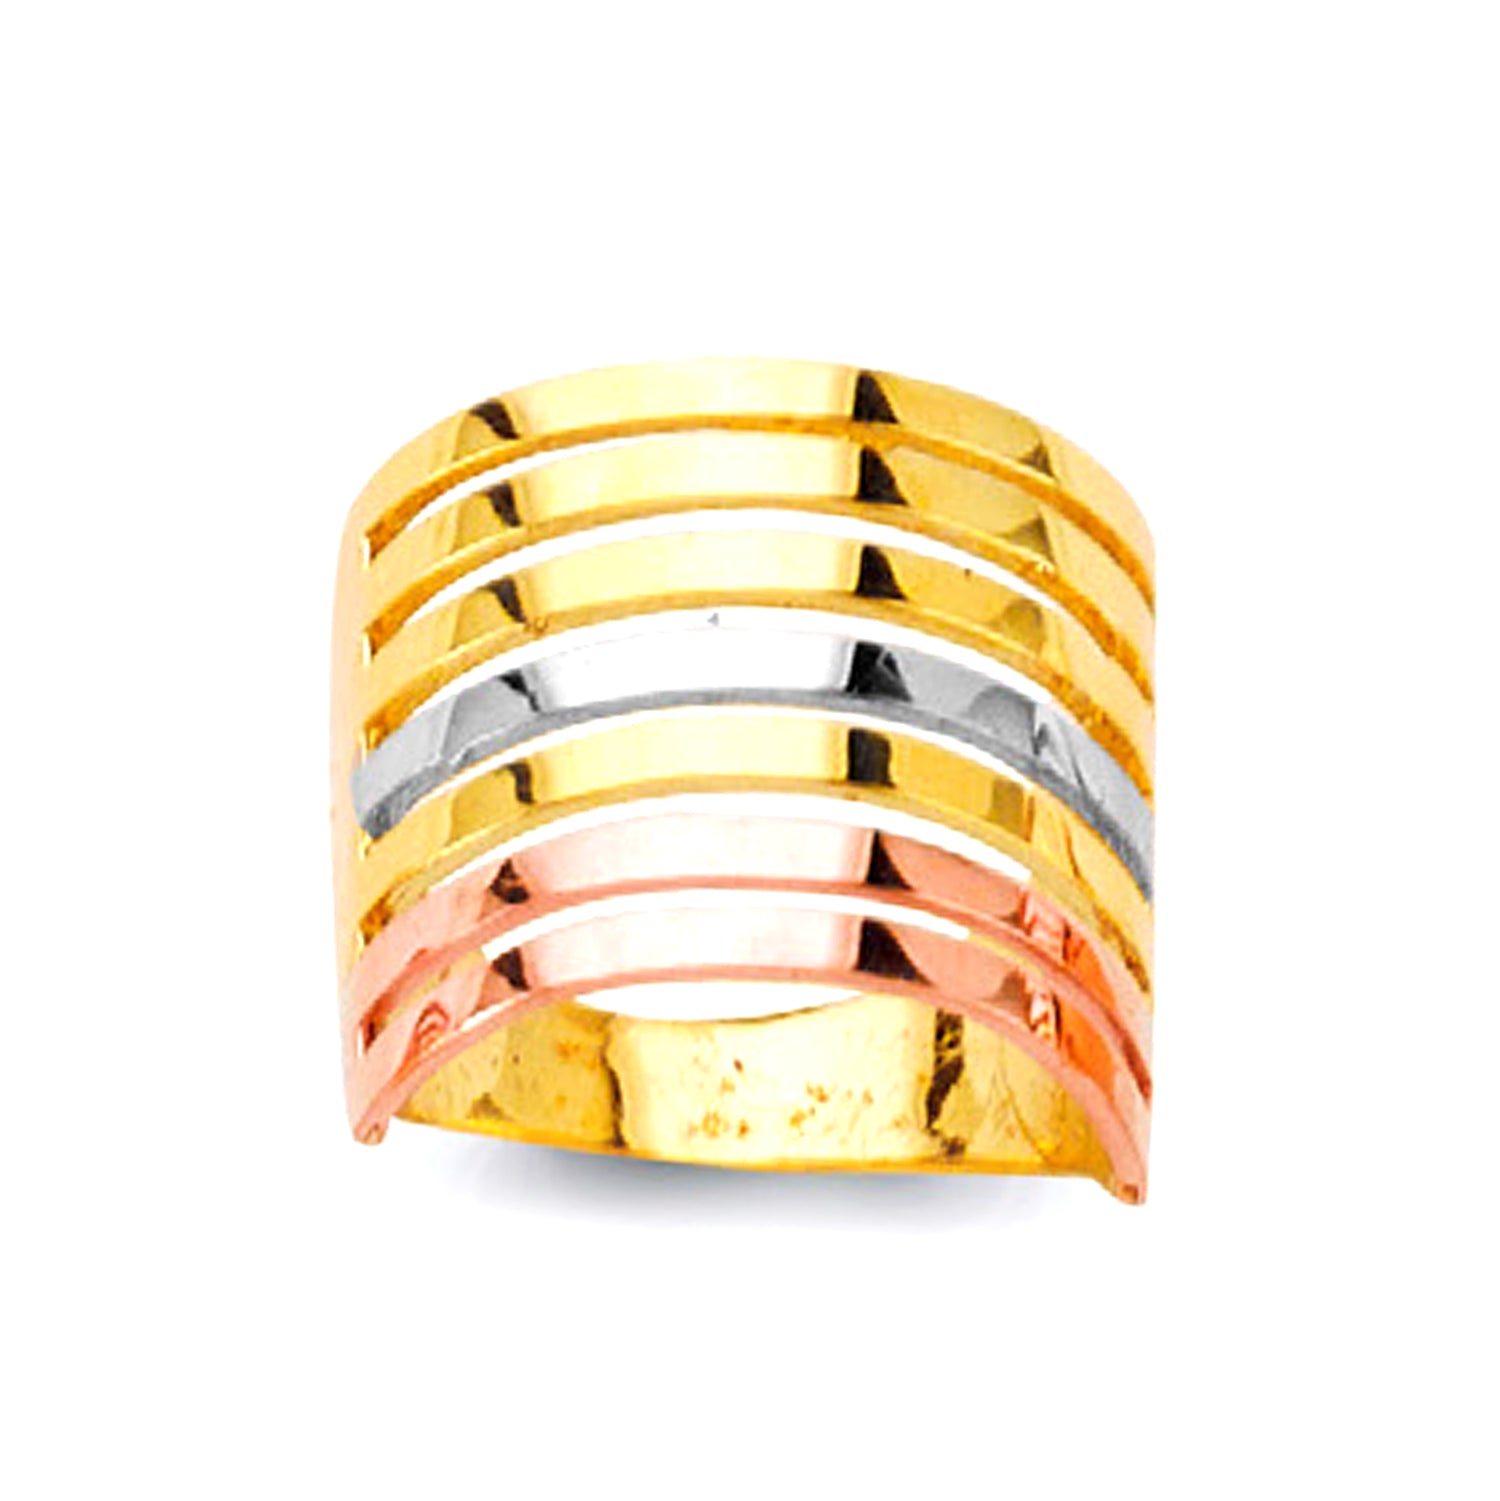 Minimalist Layered Ring in Solid Gold